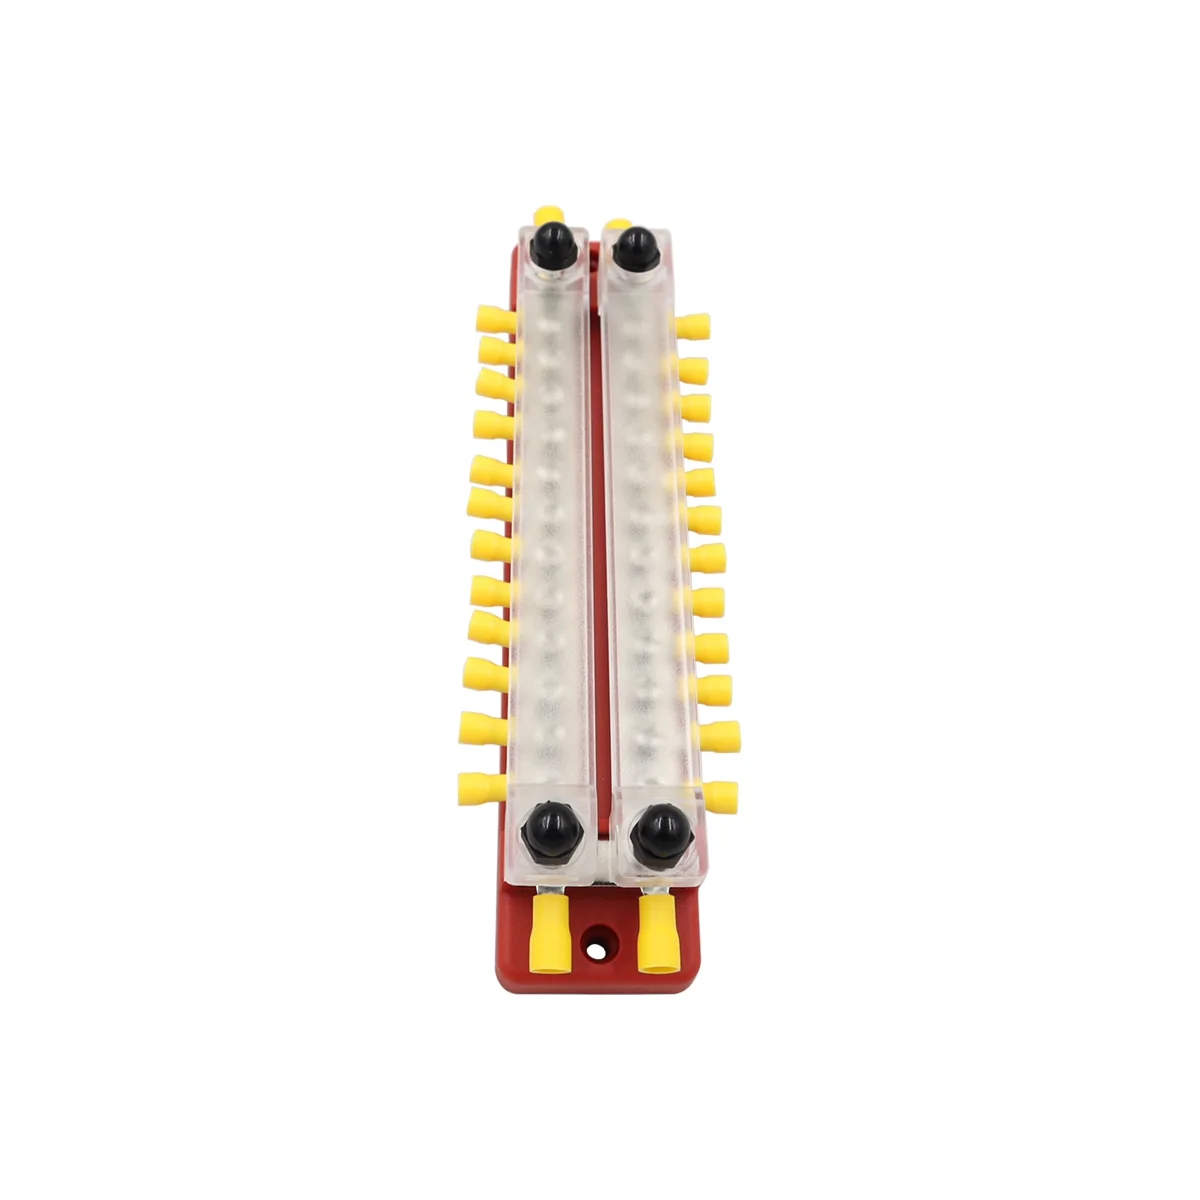 Double Row 12-Way Bus Line 150 a High Current Double Row Busbar with Transparent Cover Red images - 6